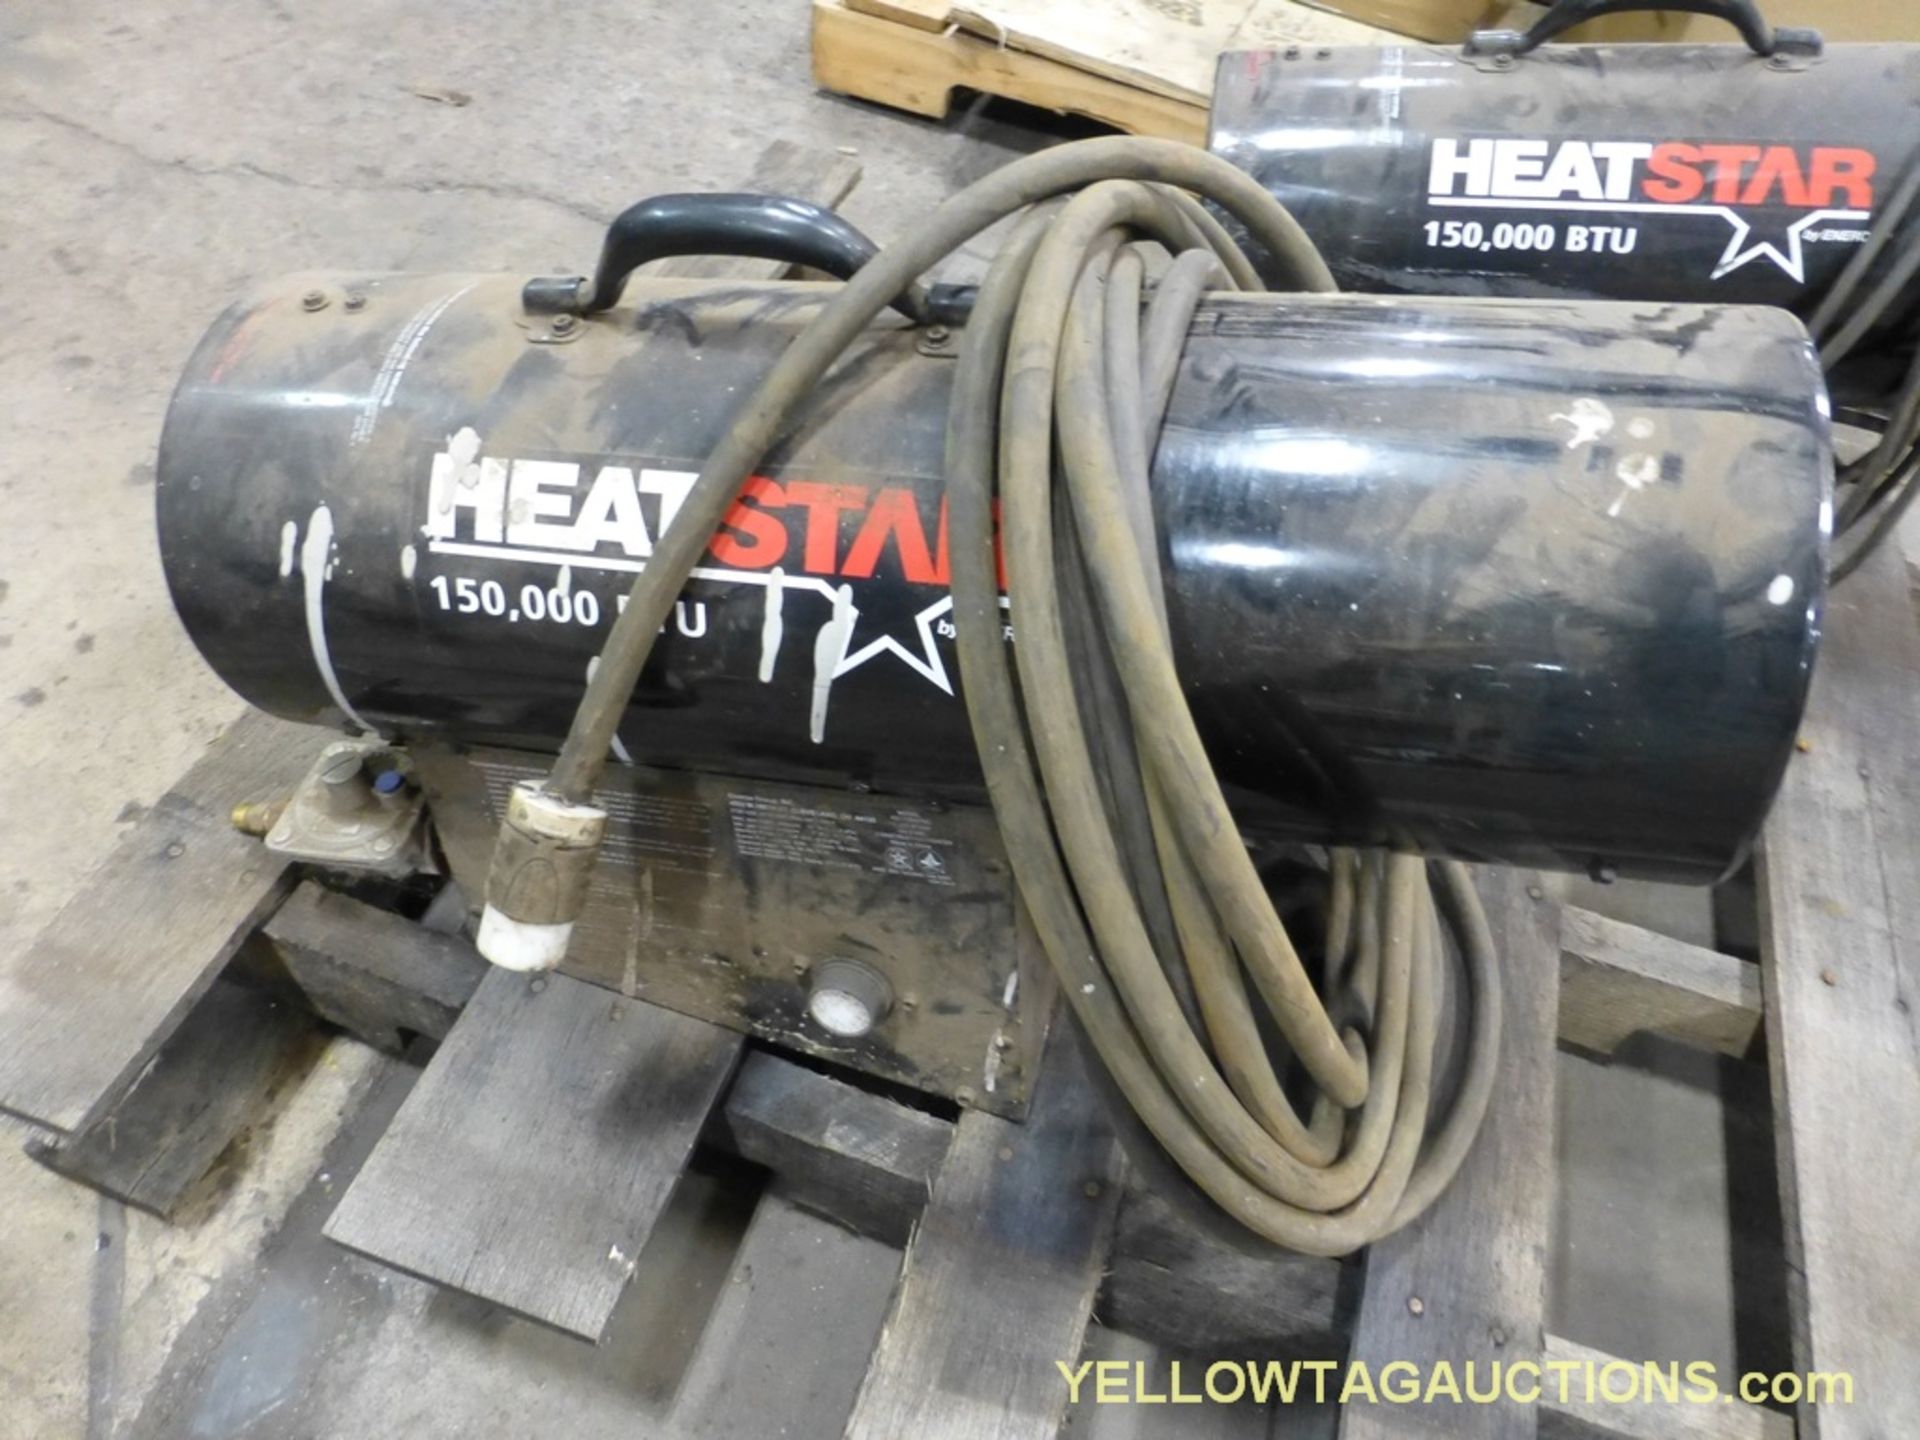 Lot of (2) Heat Star Enerco Propane Forced Air Heaters | 150,000 BTU - Image 4 of 4